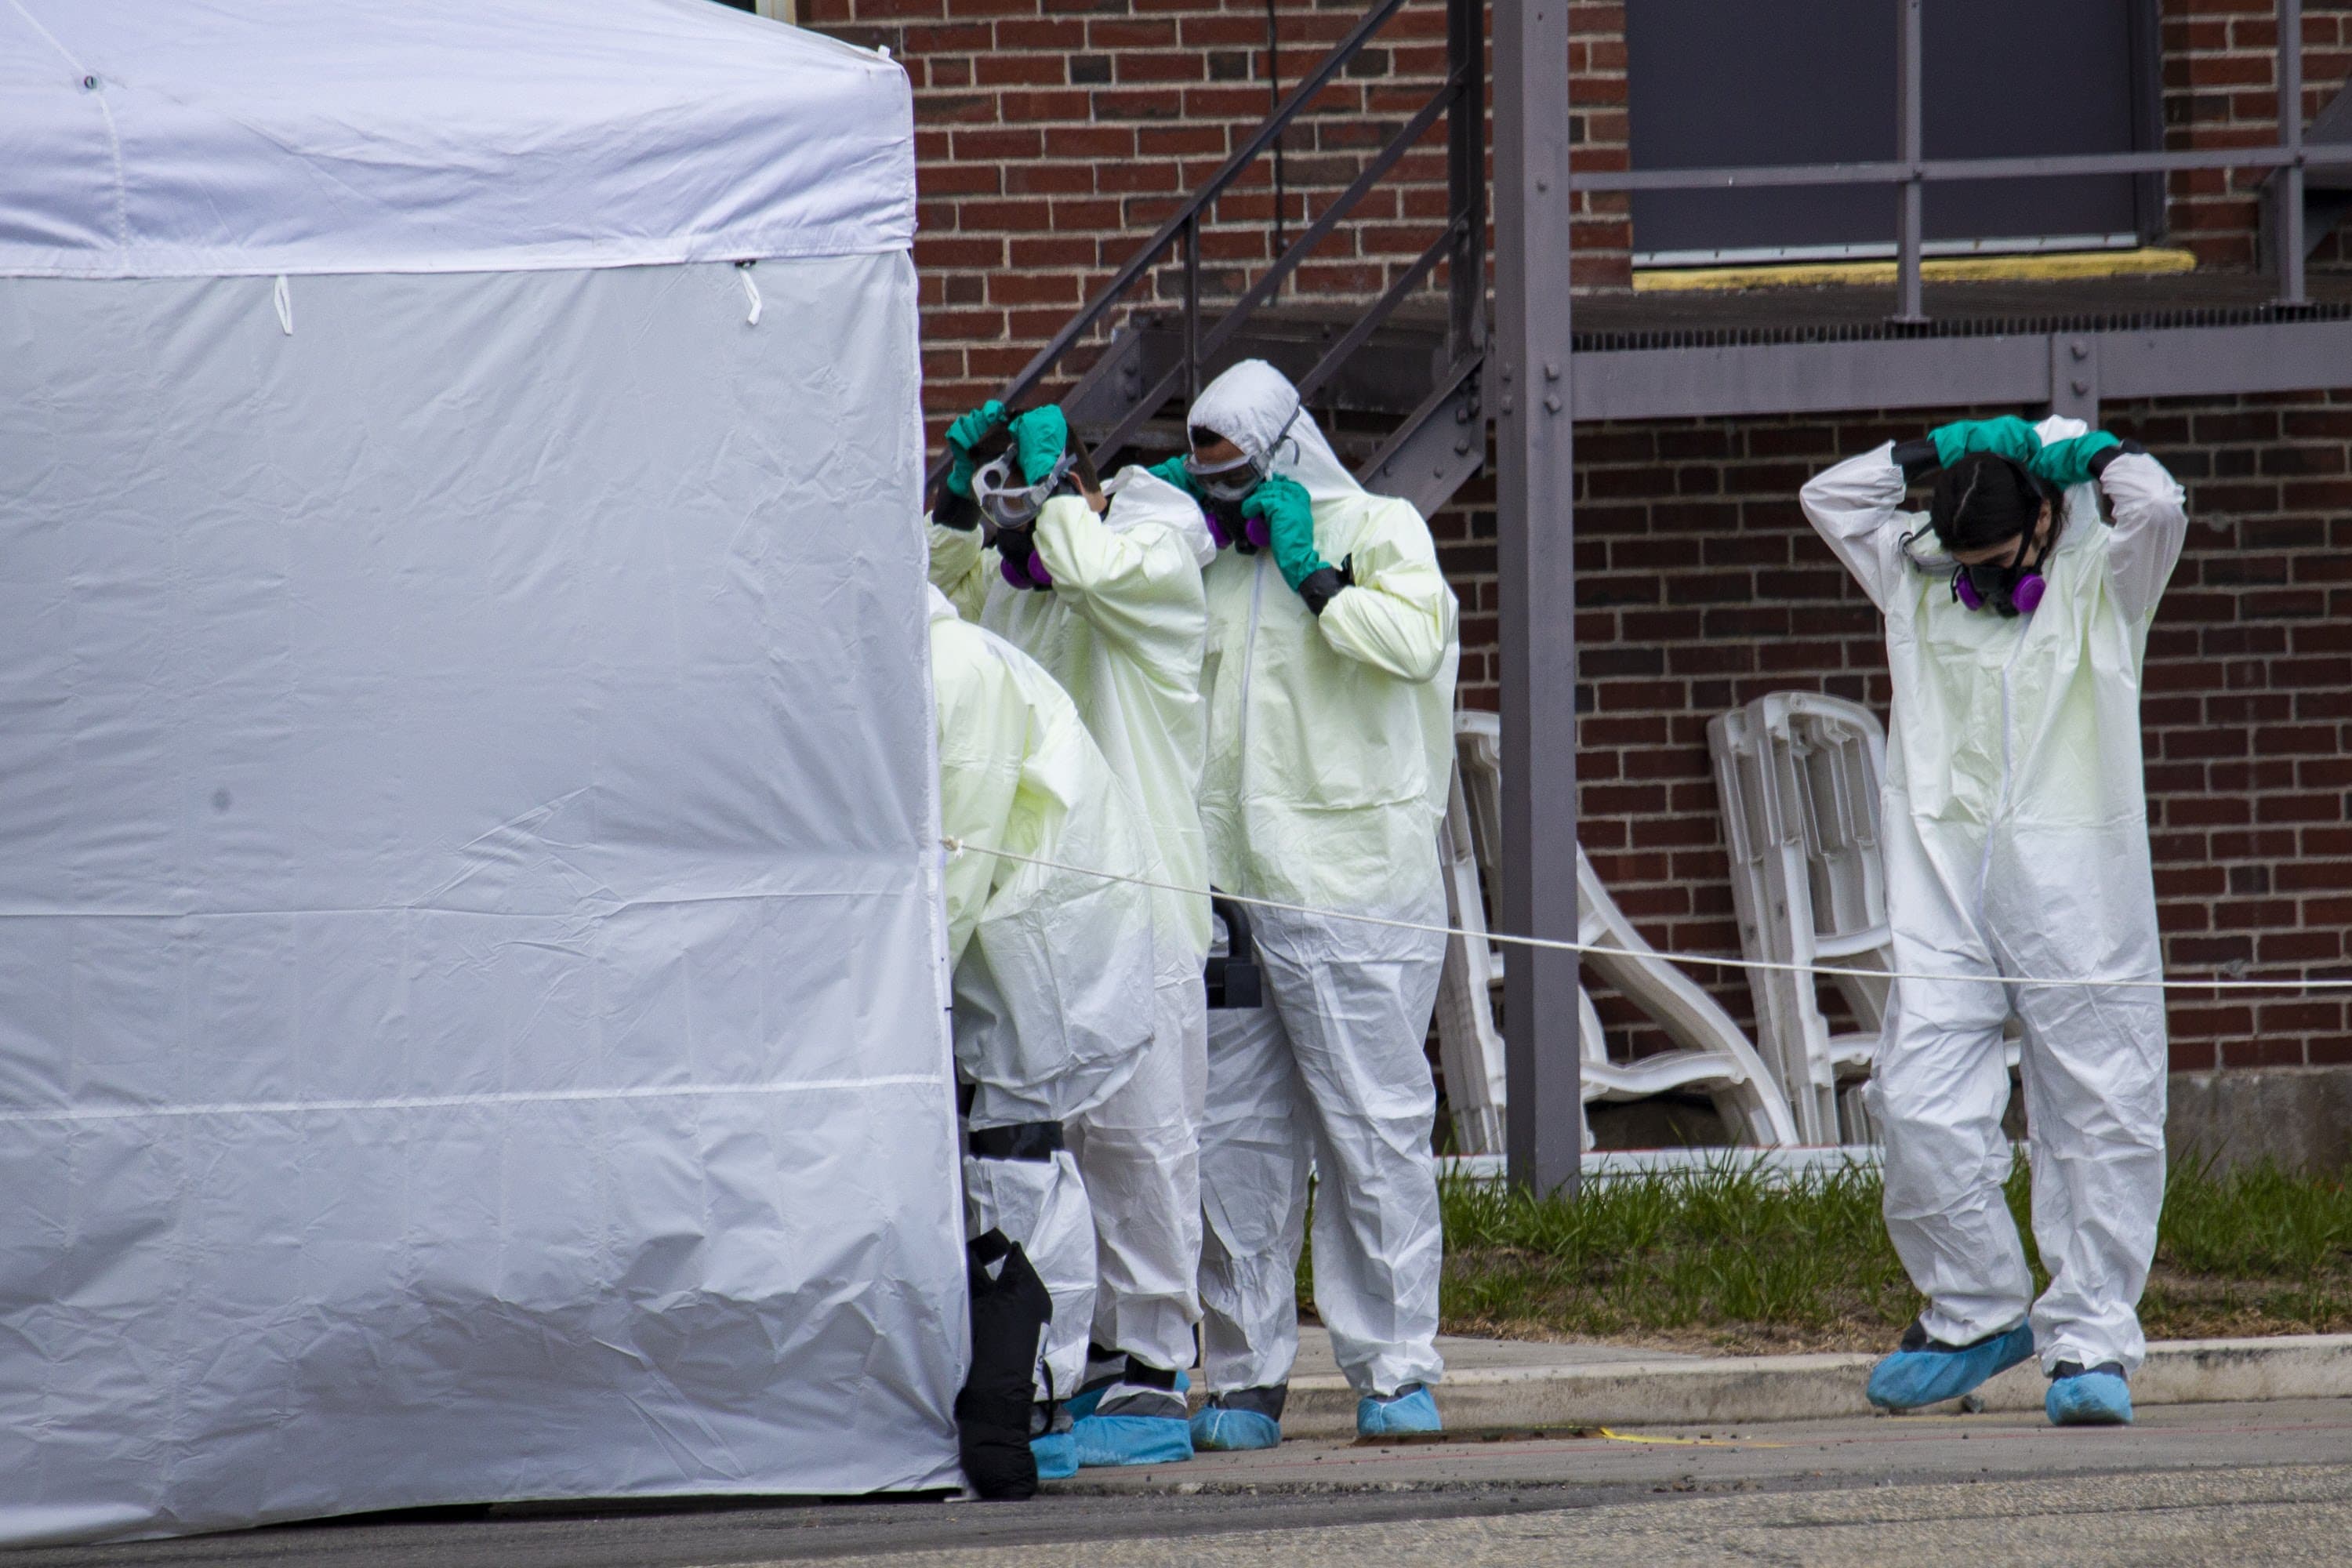 A cleaning crew is suited up with protective gear to enter the Soldiers' Home in Holyoke. (Jesse Costa/WBUR)